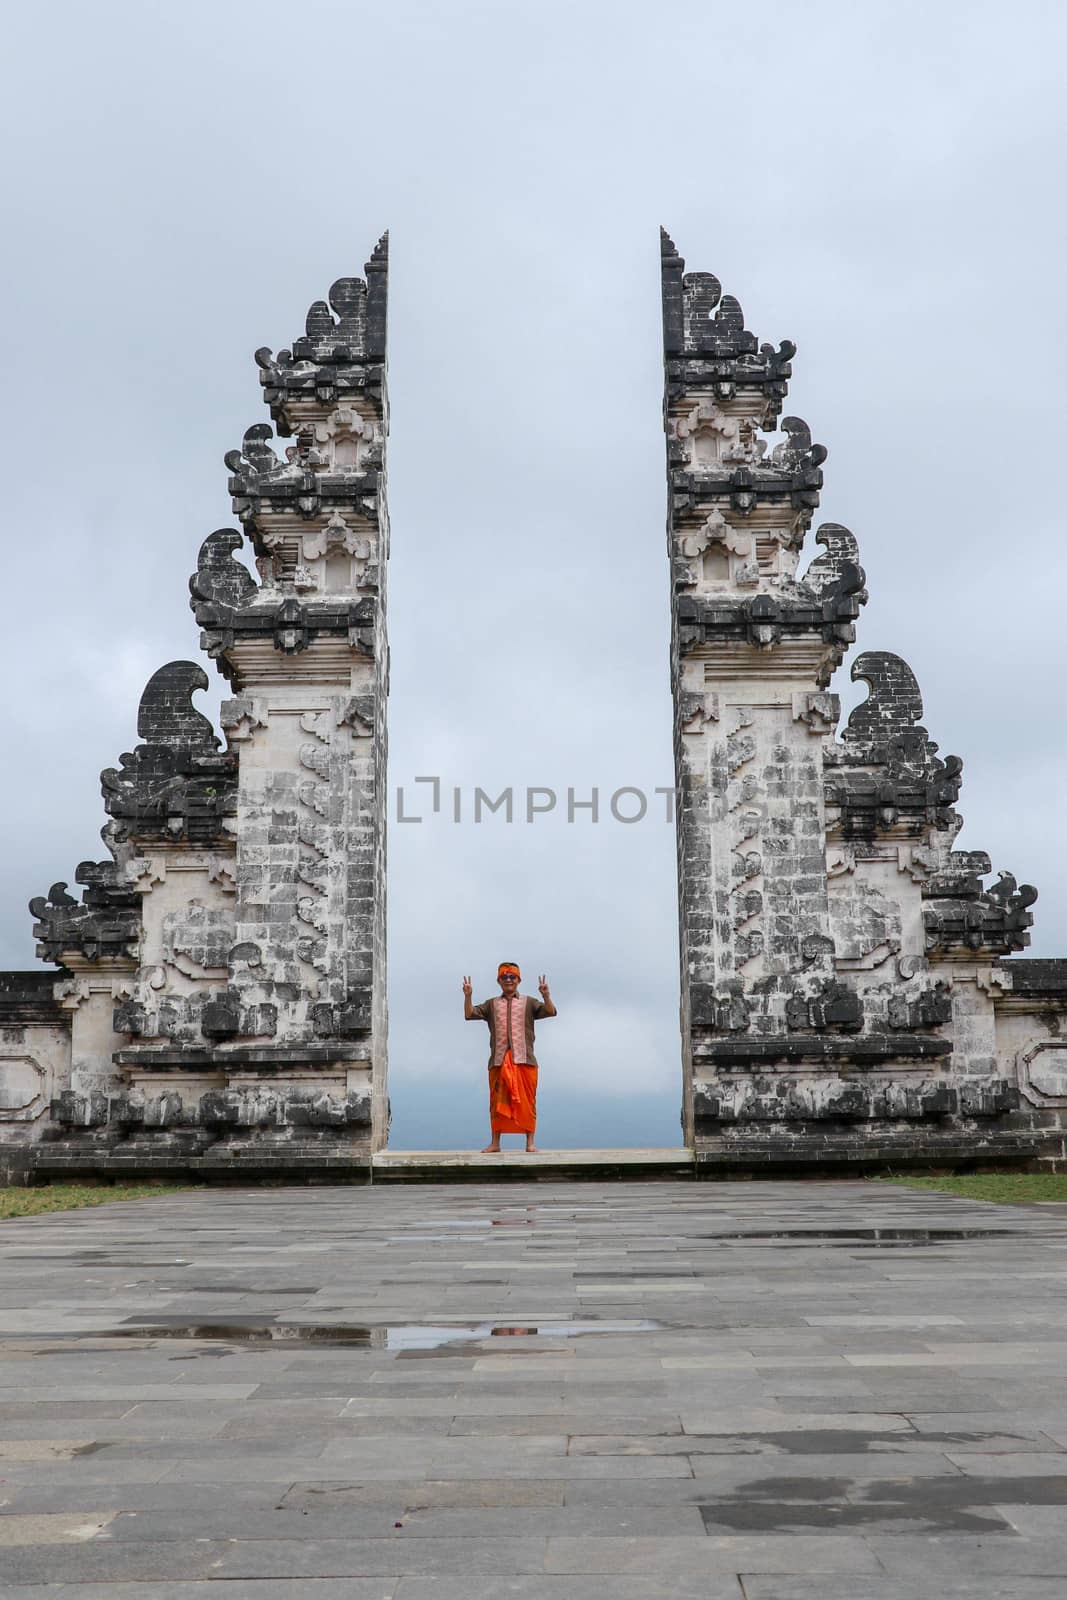 Architecture, traveling and religion. Traveler enjoying the view in Hindu temple Lempuyang in Bali, Indonesia.